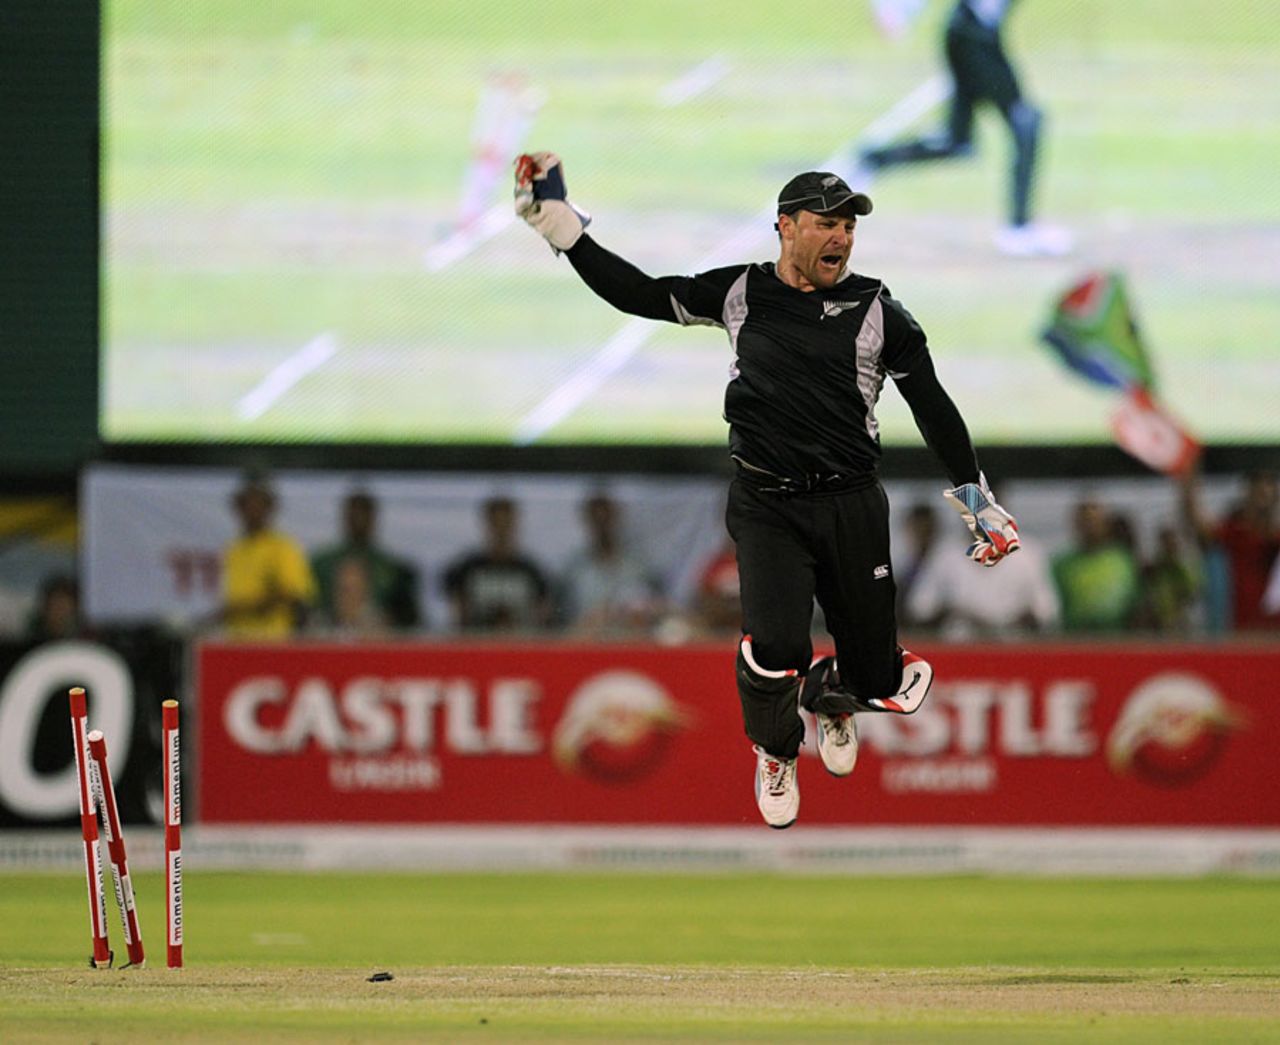 Brendon McCullum leaps after completing another run out, South Africa v New Zealand, 2nd ODI, Kimberley, January 22, 2013